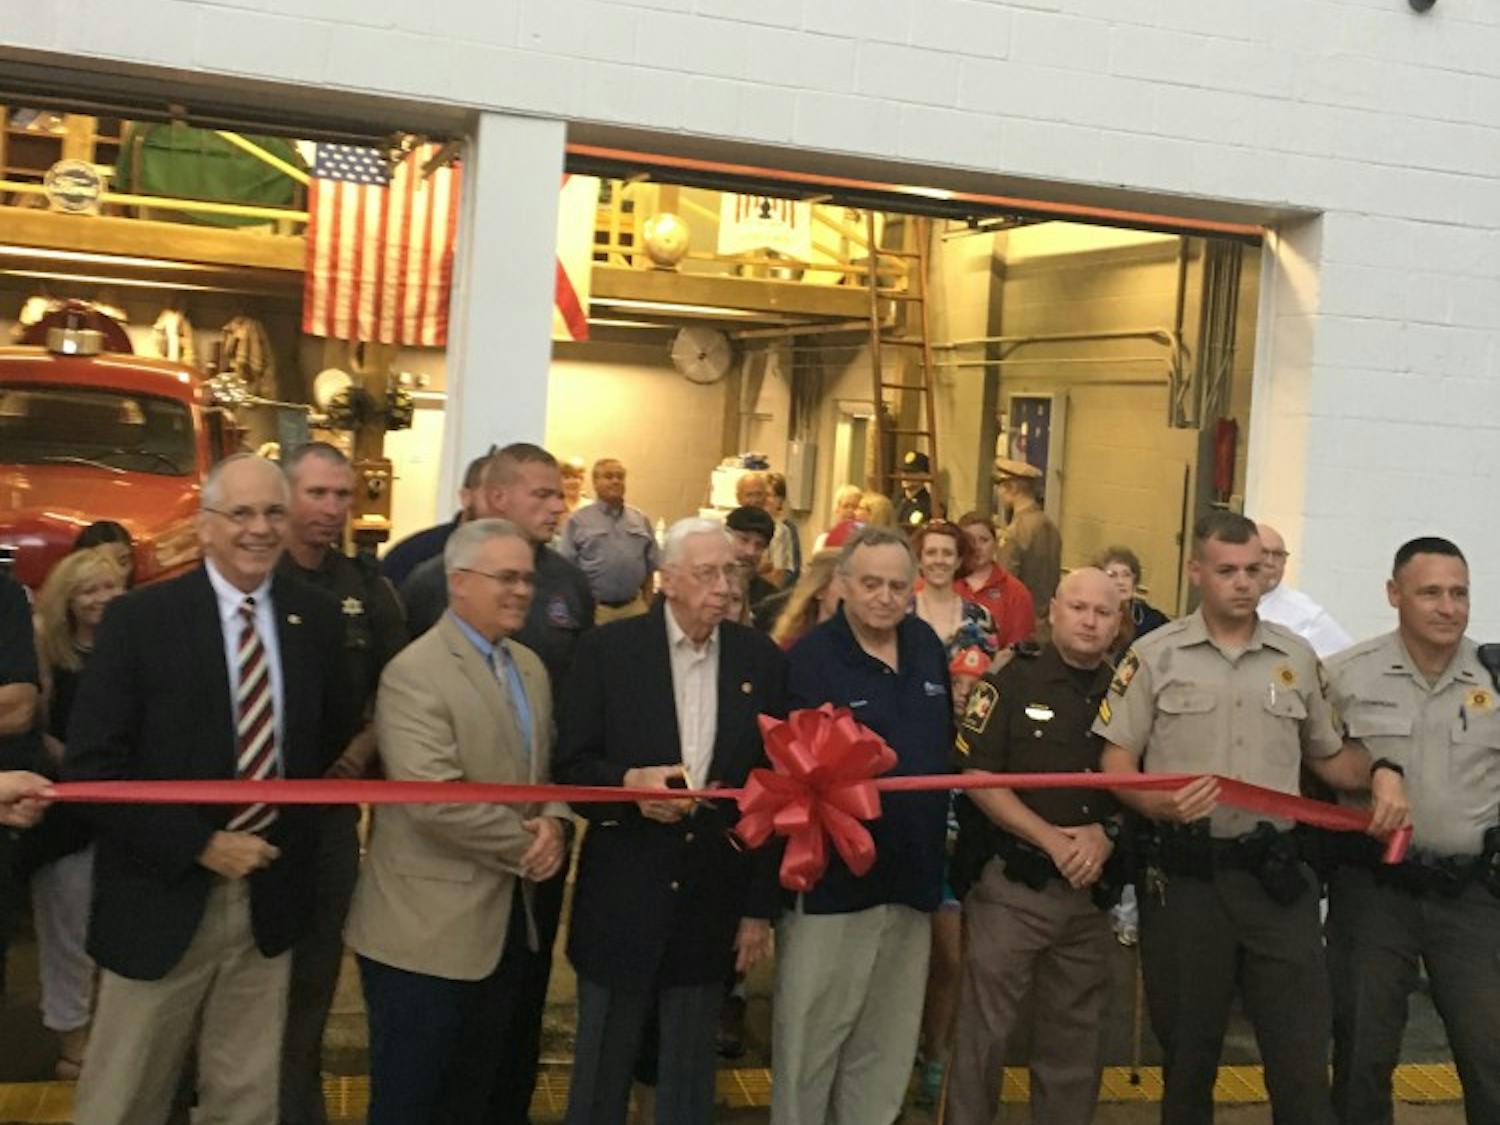 Exhibit with historic artifacts unveiled by Opelika safety departments on June 28, 2018.